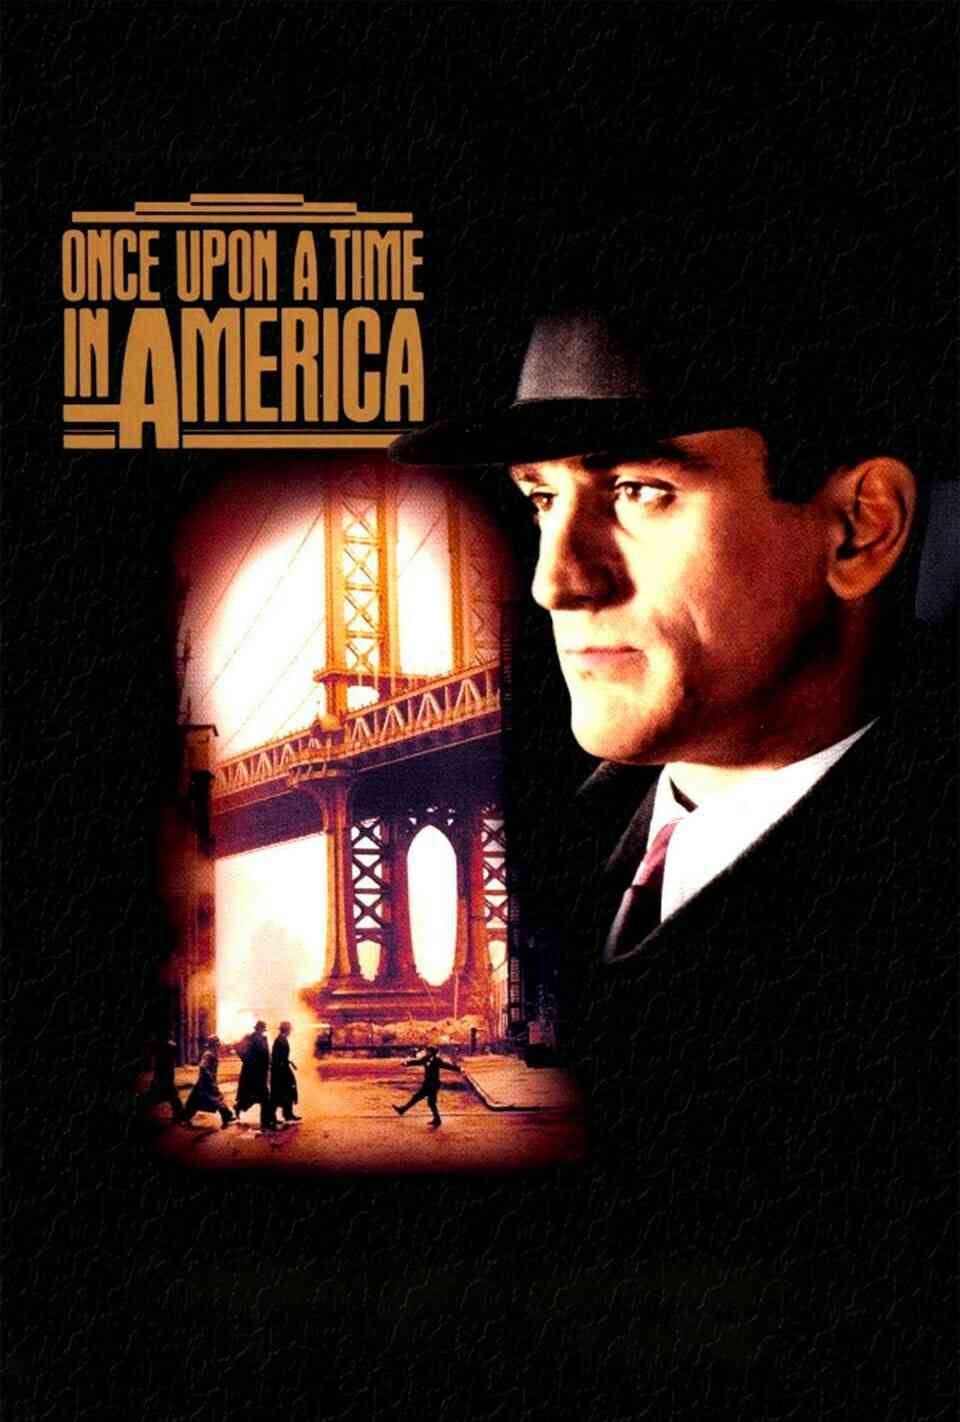 Read Once Upon a Time in America screenplay (poster)